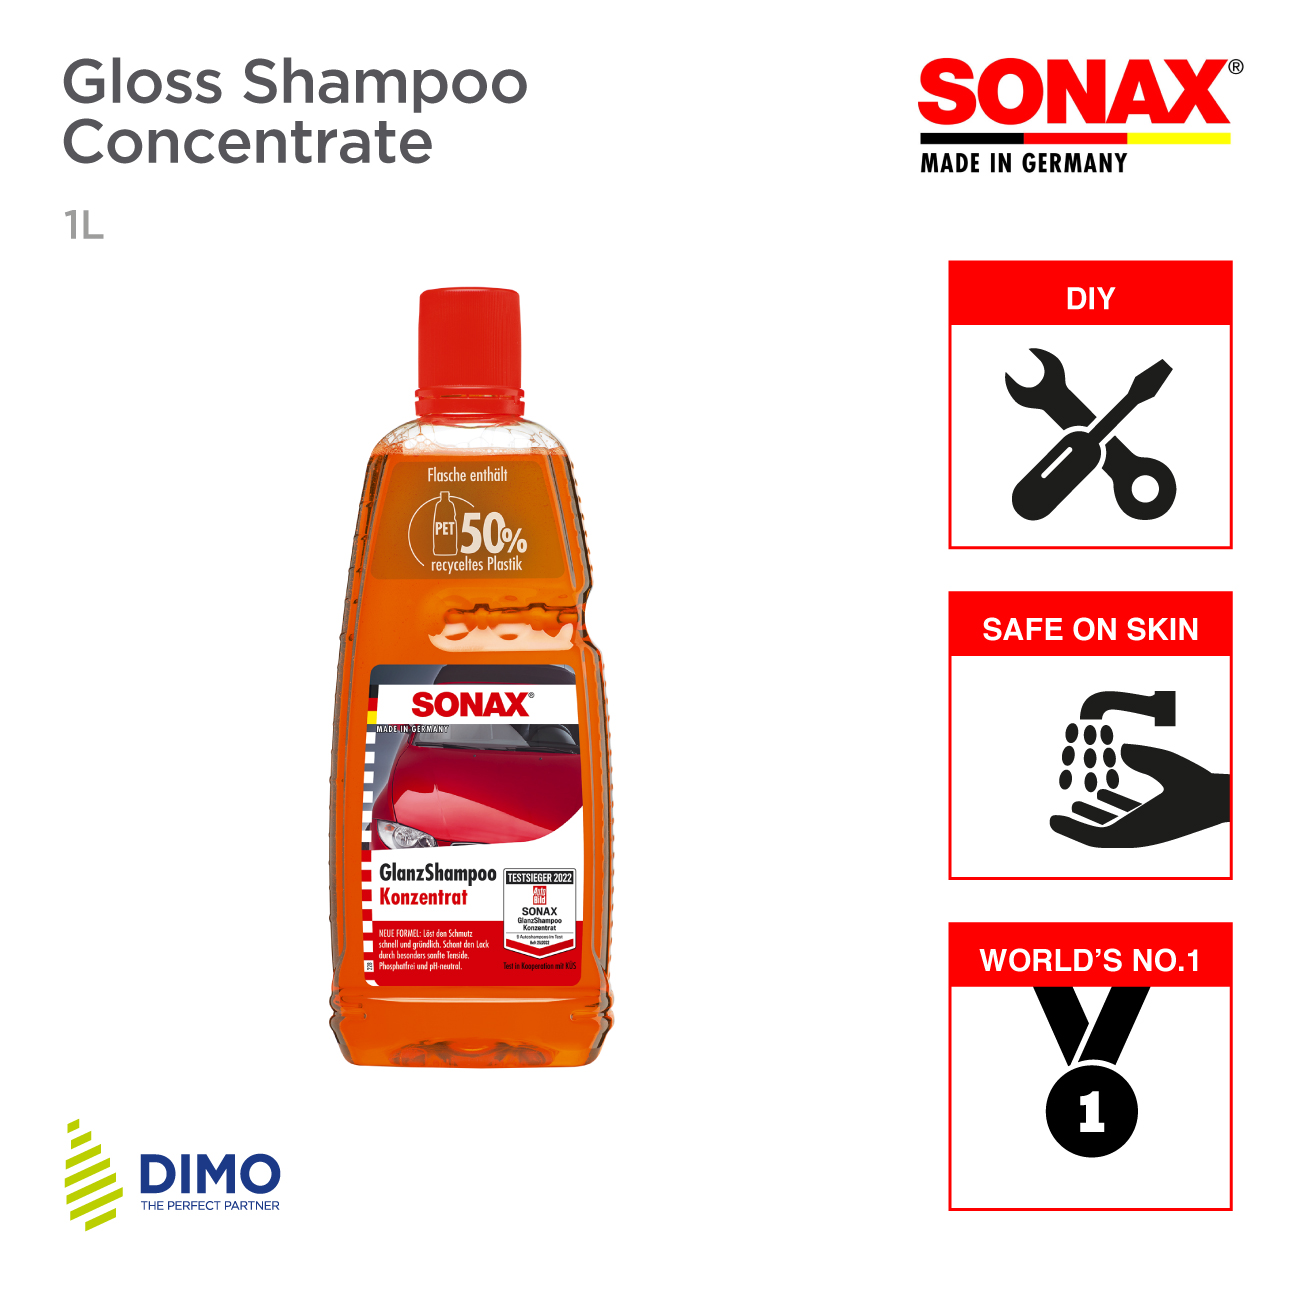 Gloss-Shampoo-Concentrate-1L